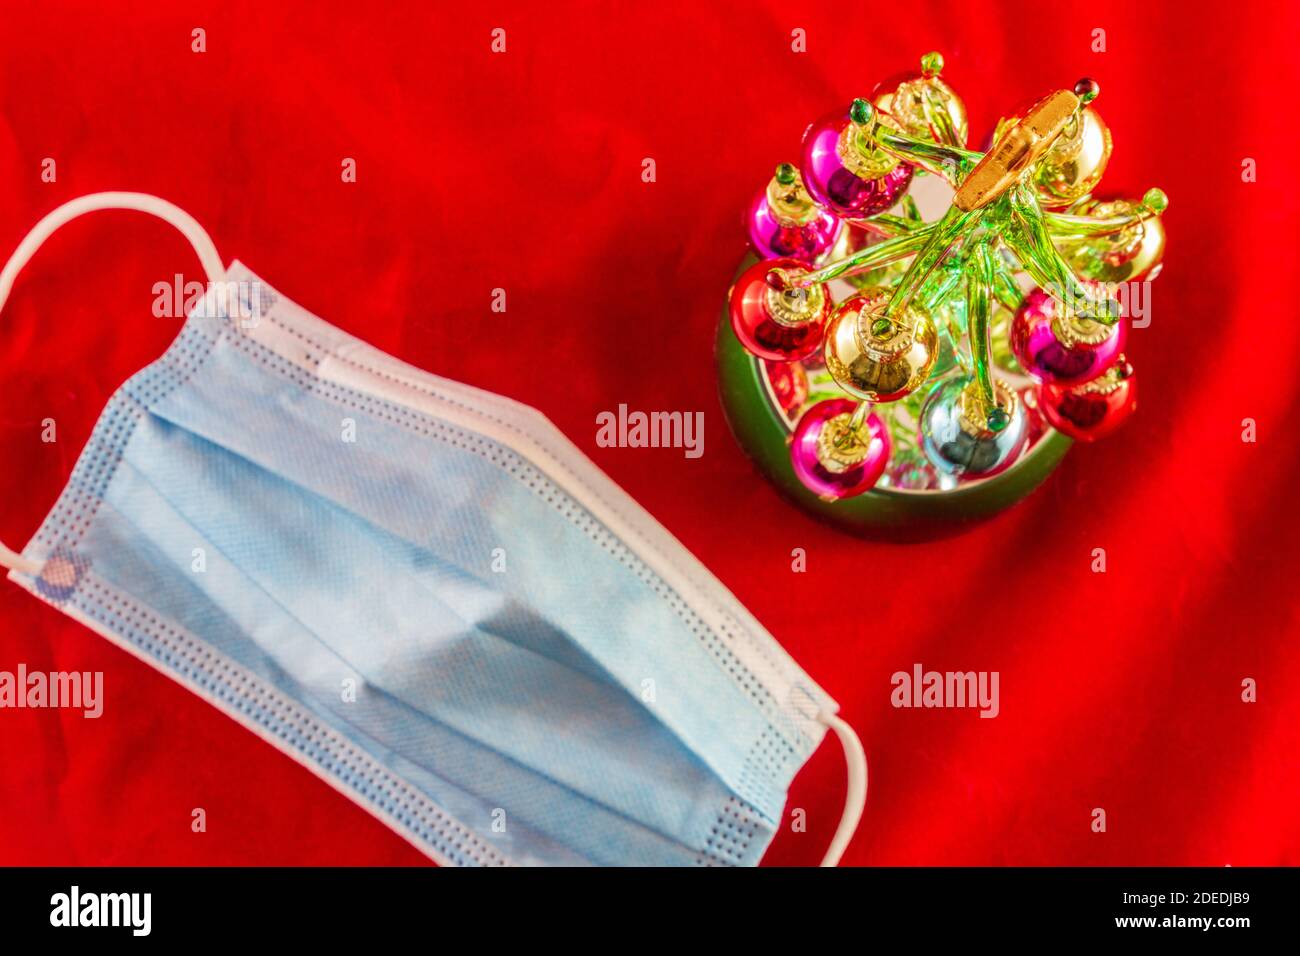 Mini Christmas tree next to a blue facemask, top view. Christmas in the covod-19 era concept photo. Stock Photo